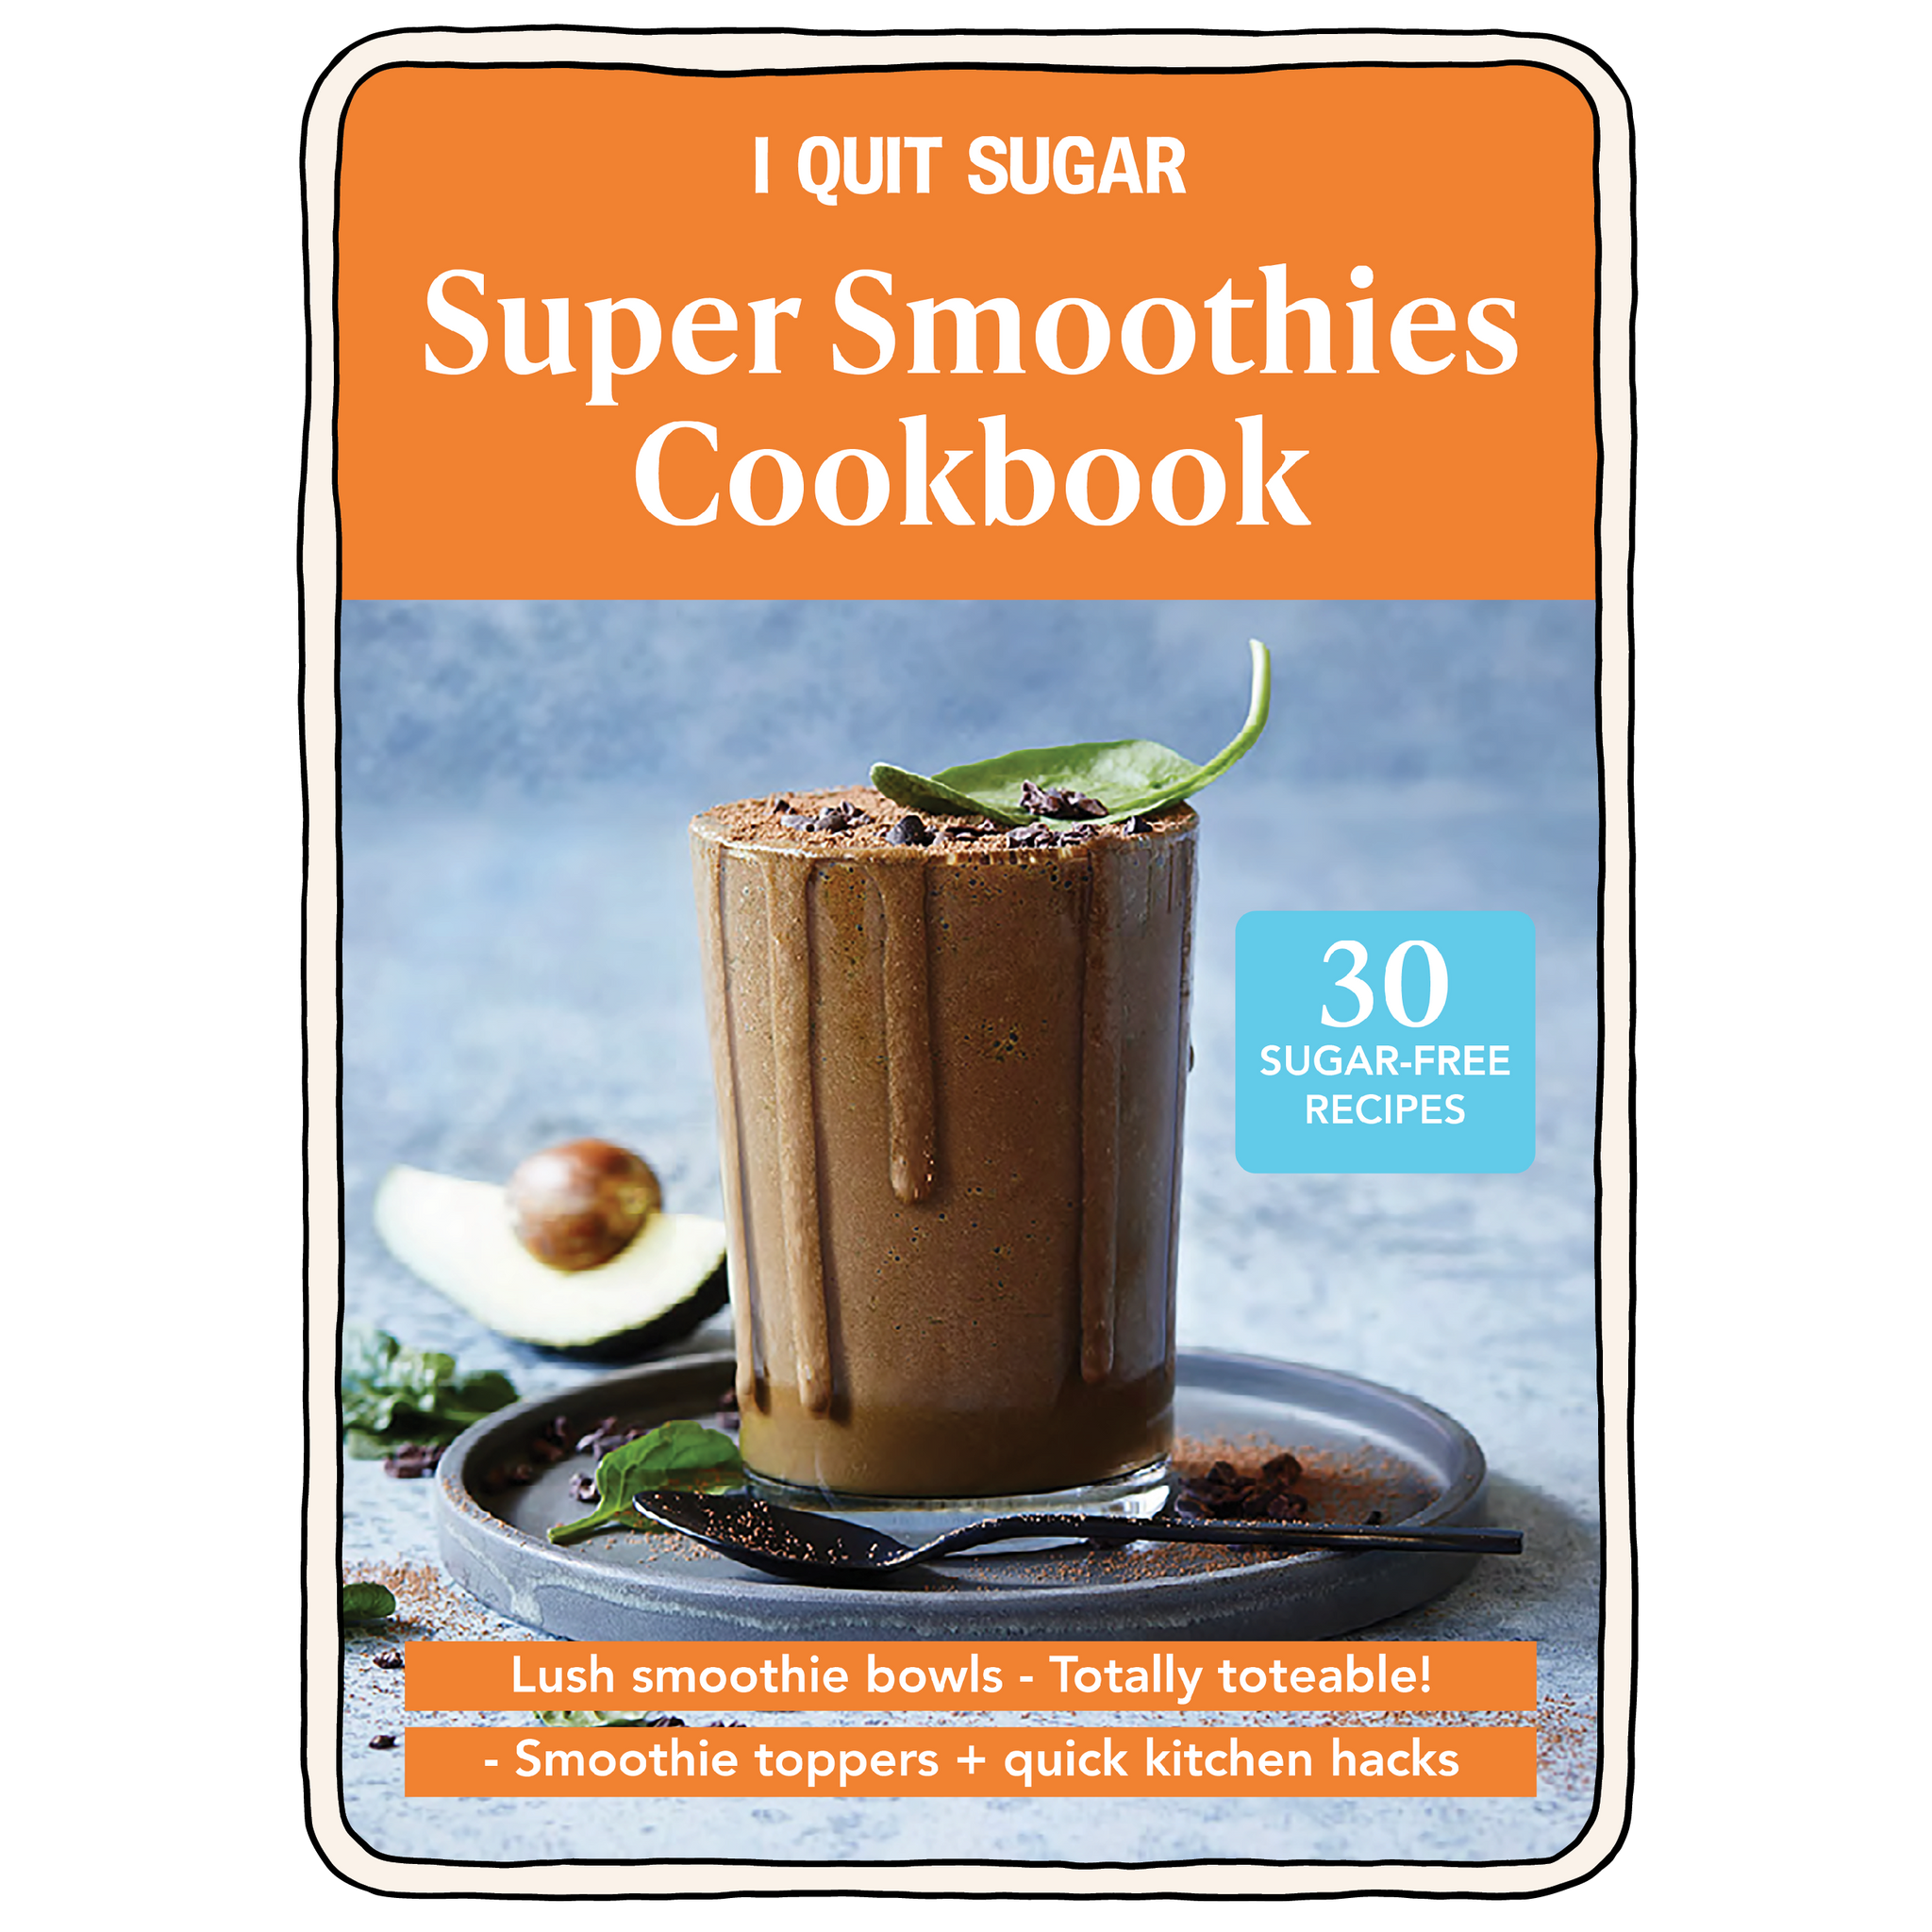 Super Smoothies Cookbook | Smoothies Recipe Book by I Quit Sugar